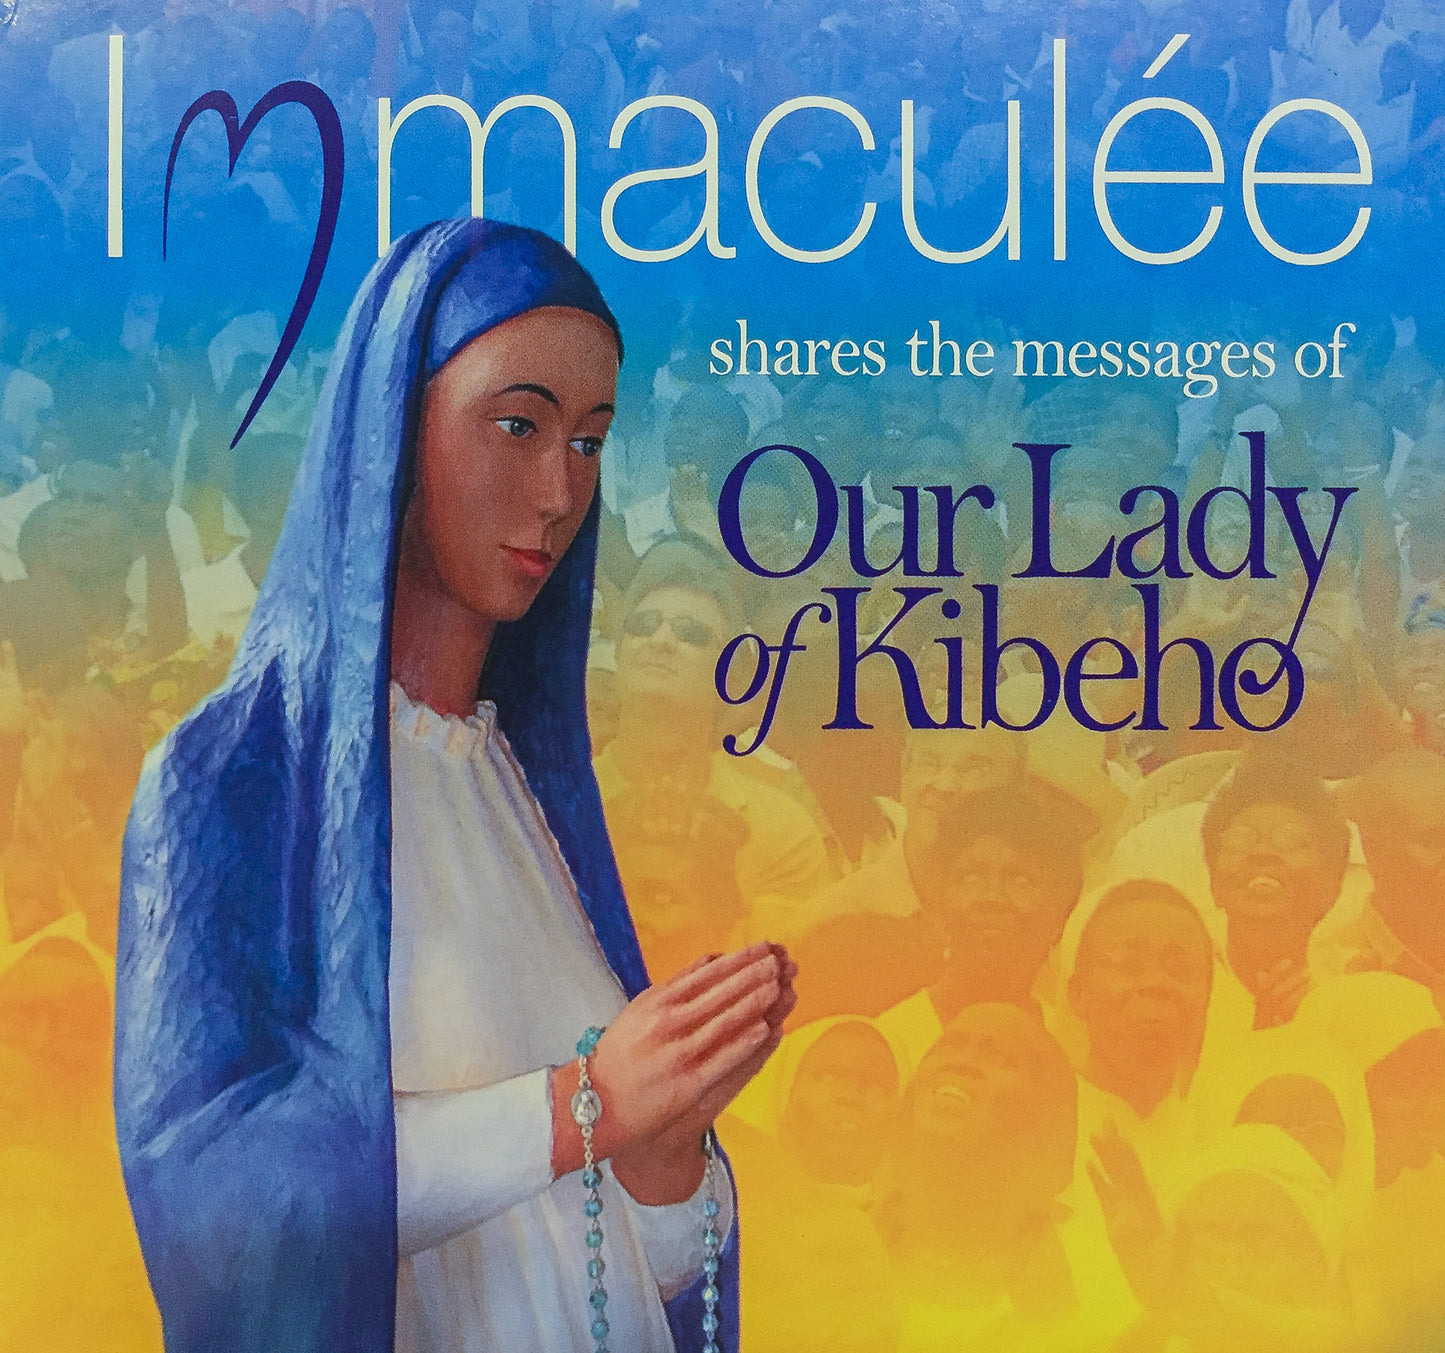 Messages of Our Lady of Kibeho MP3 Download by Immaculee Ilibagiza